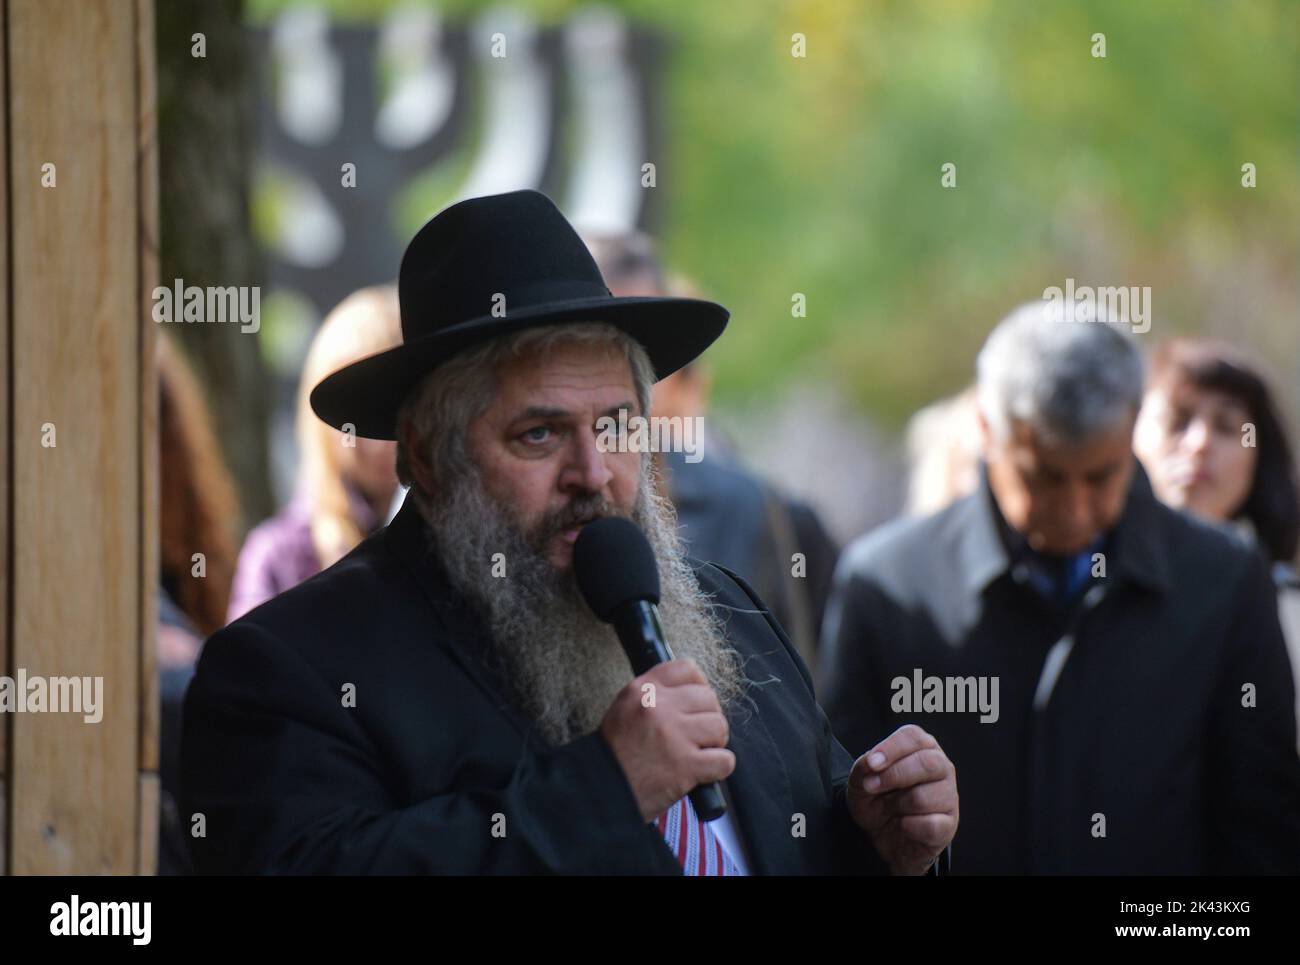 KYIV, UKRAINE - SEPTEMBER 29, 2022 - Chief Rabbi of Ukraine Moshe Reuven Asman speaks during a joint interreligious prayer dedicated to the Day of Remembrance of the Babyn Yar Victims at the symbolic Place for Reflection synagogue on the territory of the Babyn Yar National Historical and Memorial Reserve, Kyiv, capital of Ukraine. Stock Photo